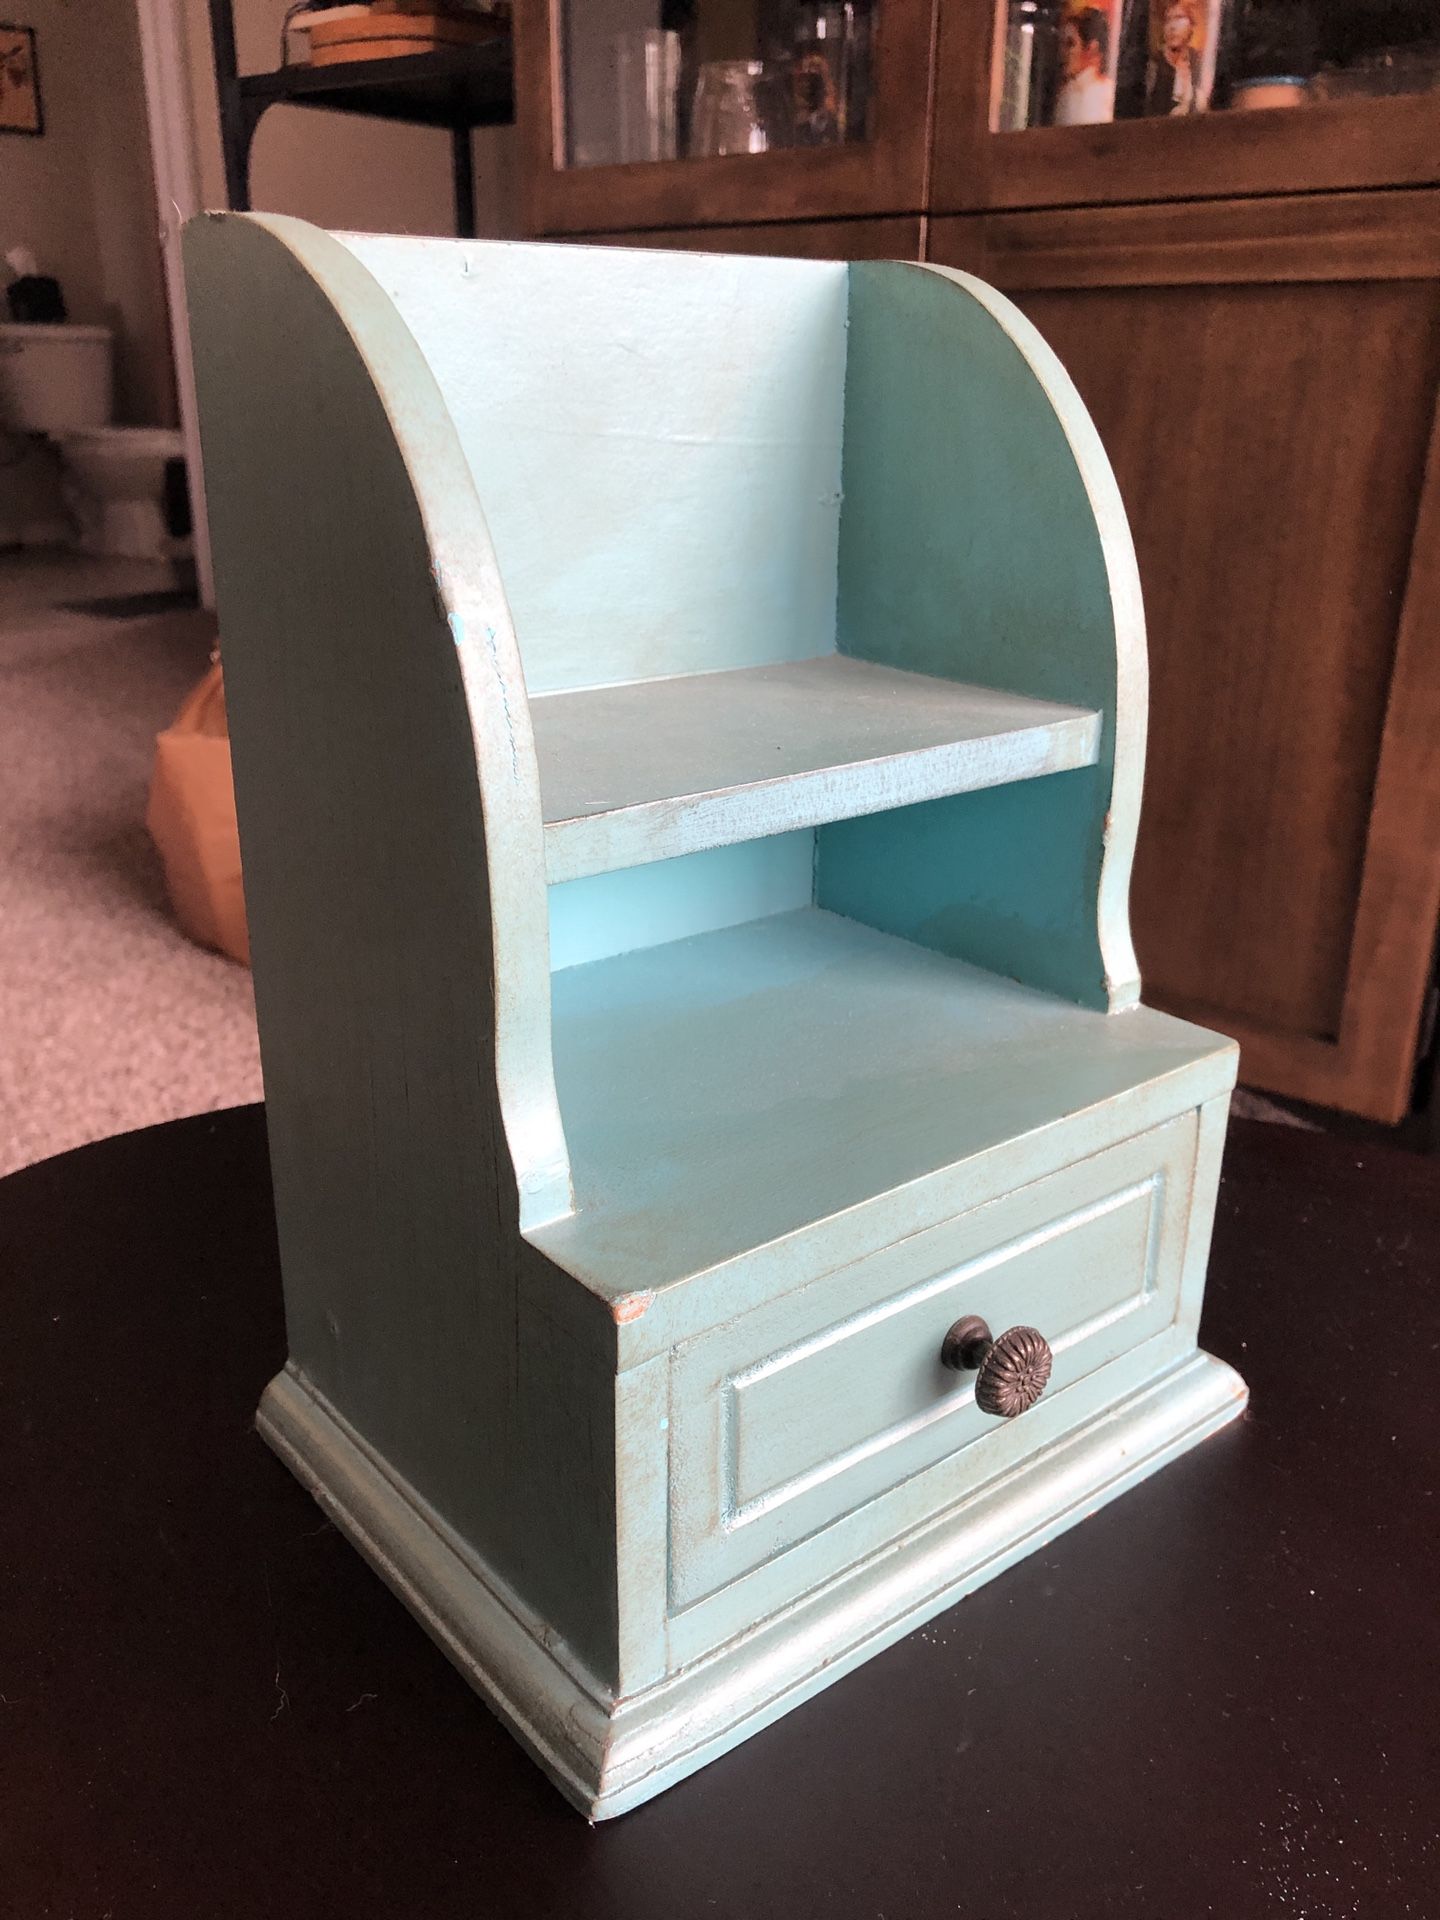 Small blue shelf and drawer